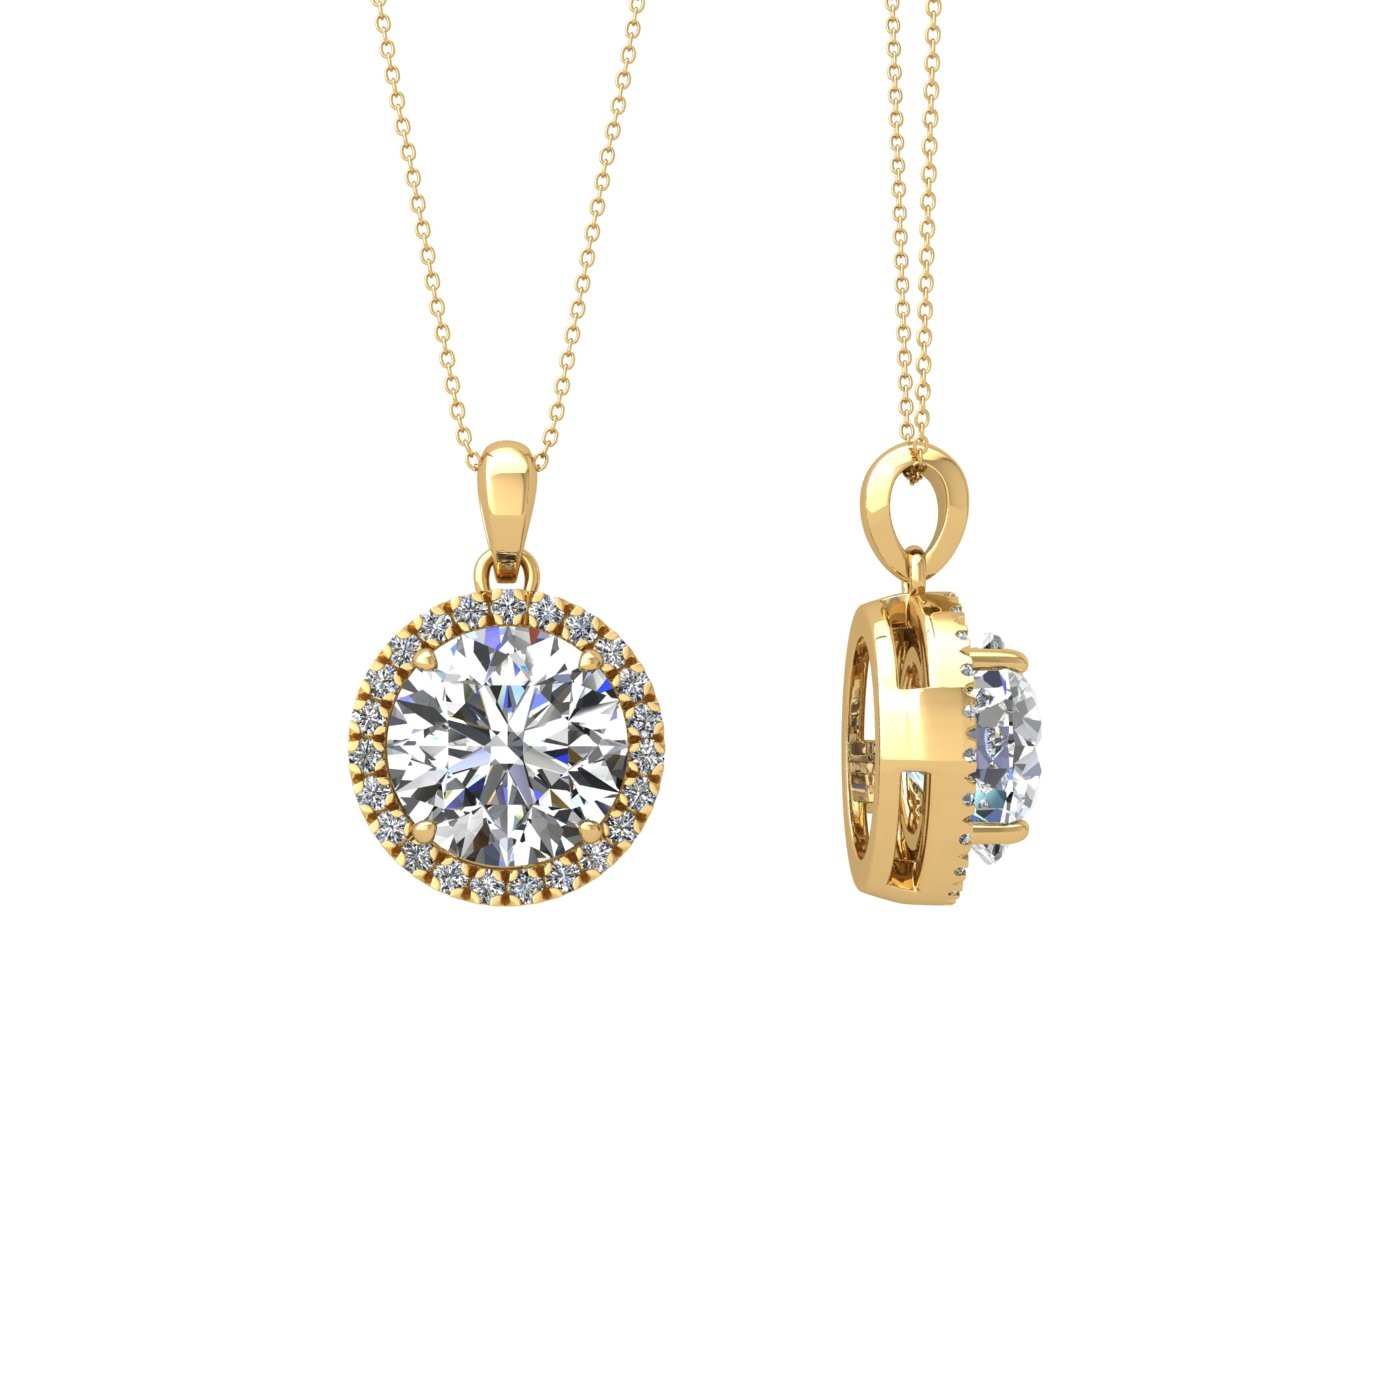 18k yellow gold  2,5 ct 4 prong round shape diamond pendant with diamond pavÉ set halo including chain seperate from the pendant Photos & images